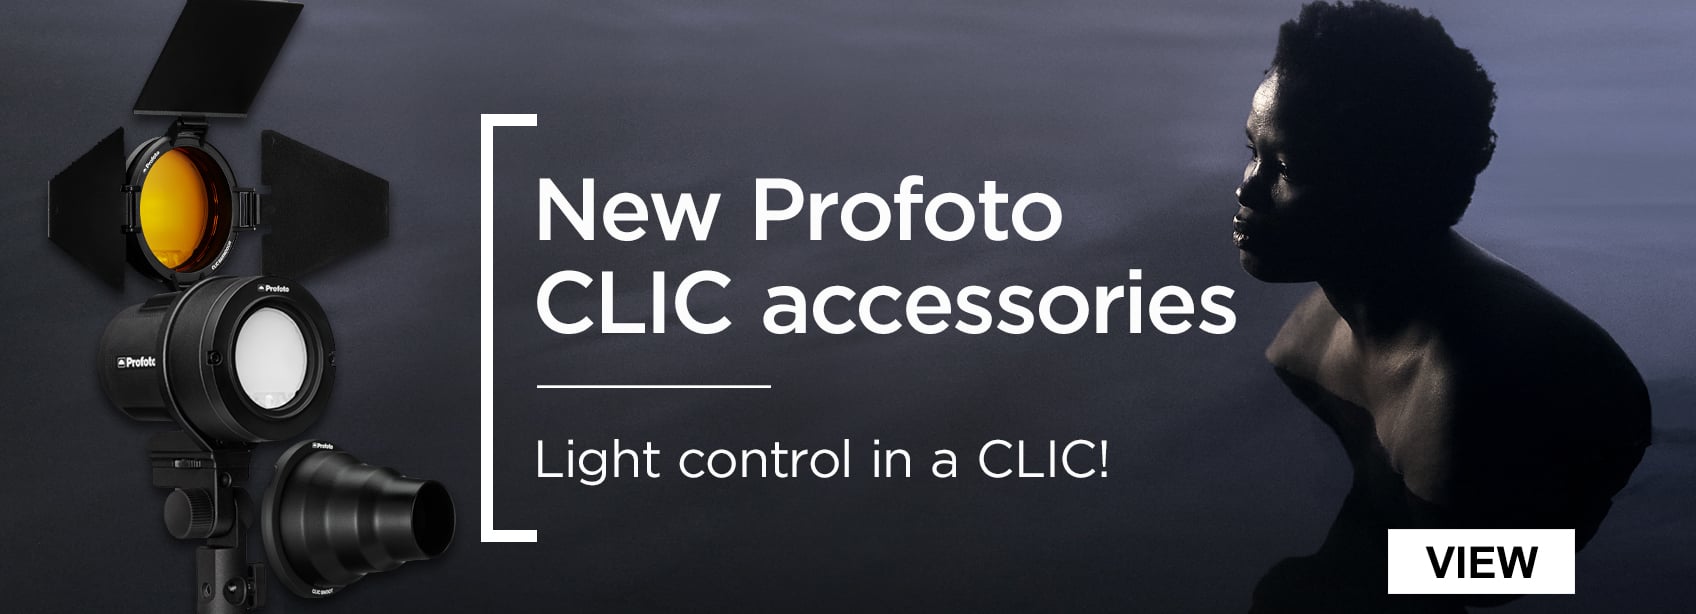 Profoto CLIC Accessories: Launching today